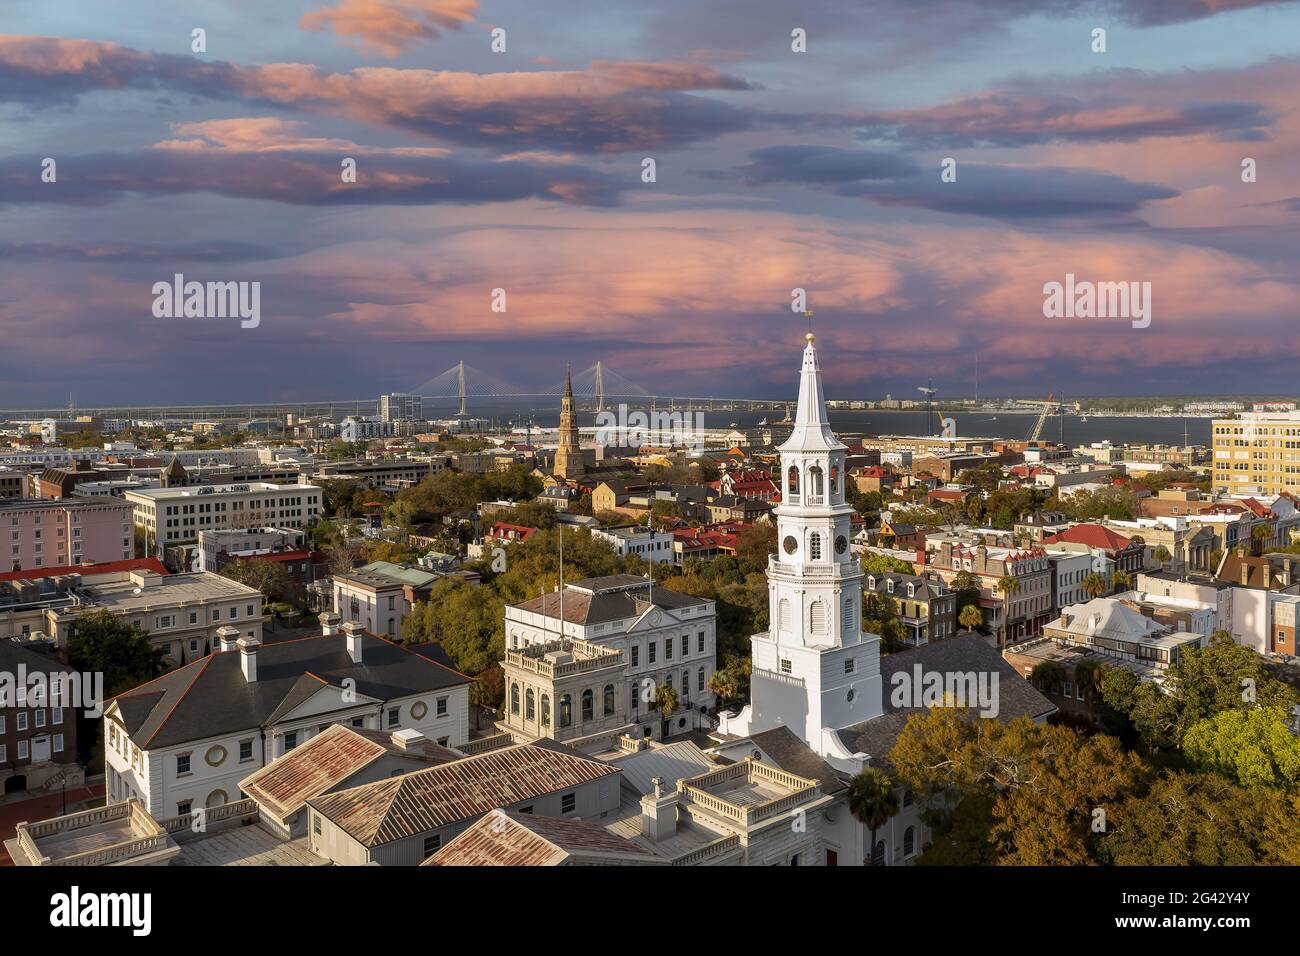 Personal Drone In Action In The City Of Charleston, SC Stock Photo